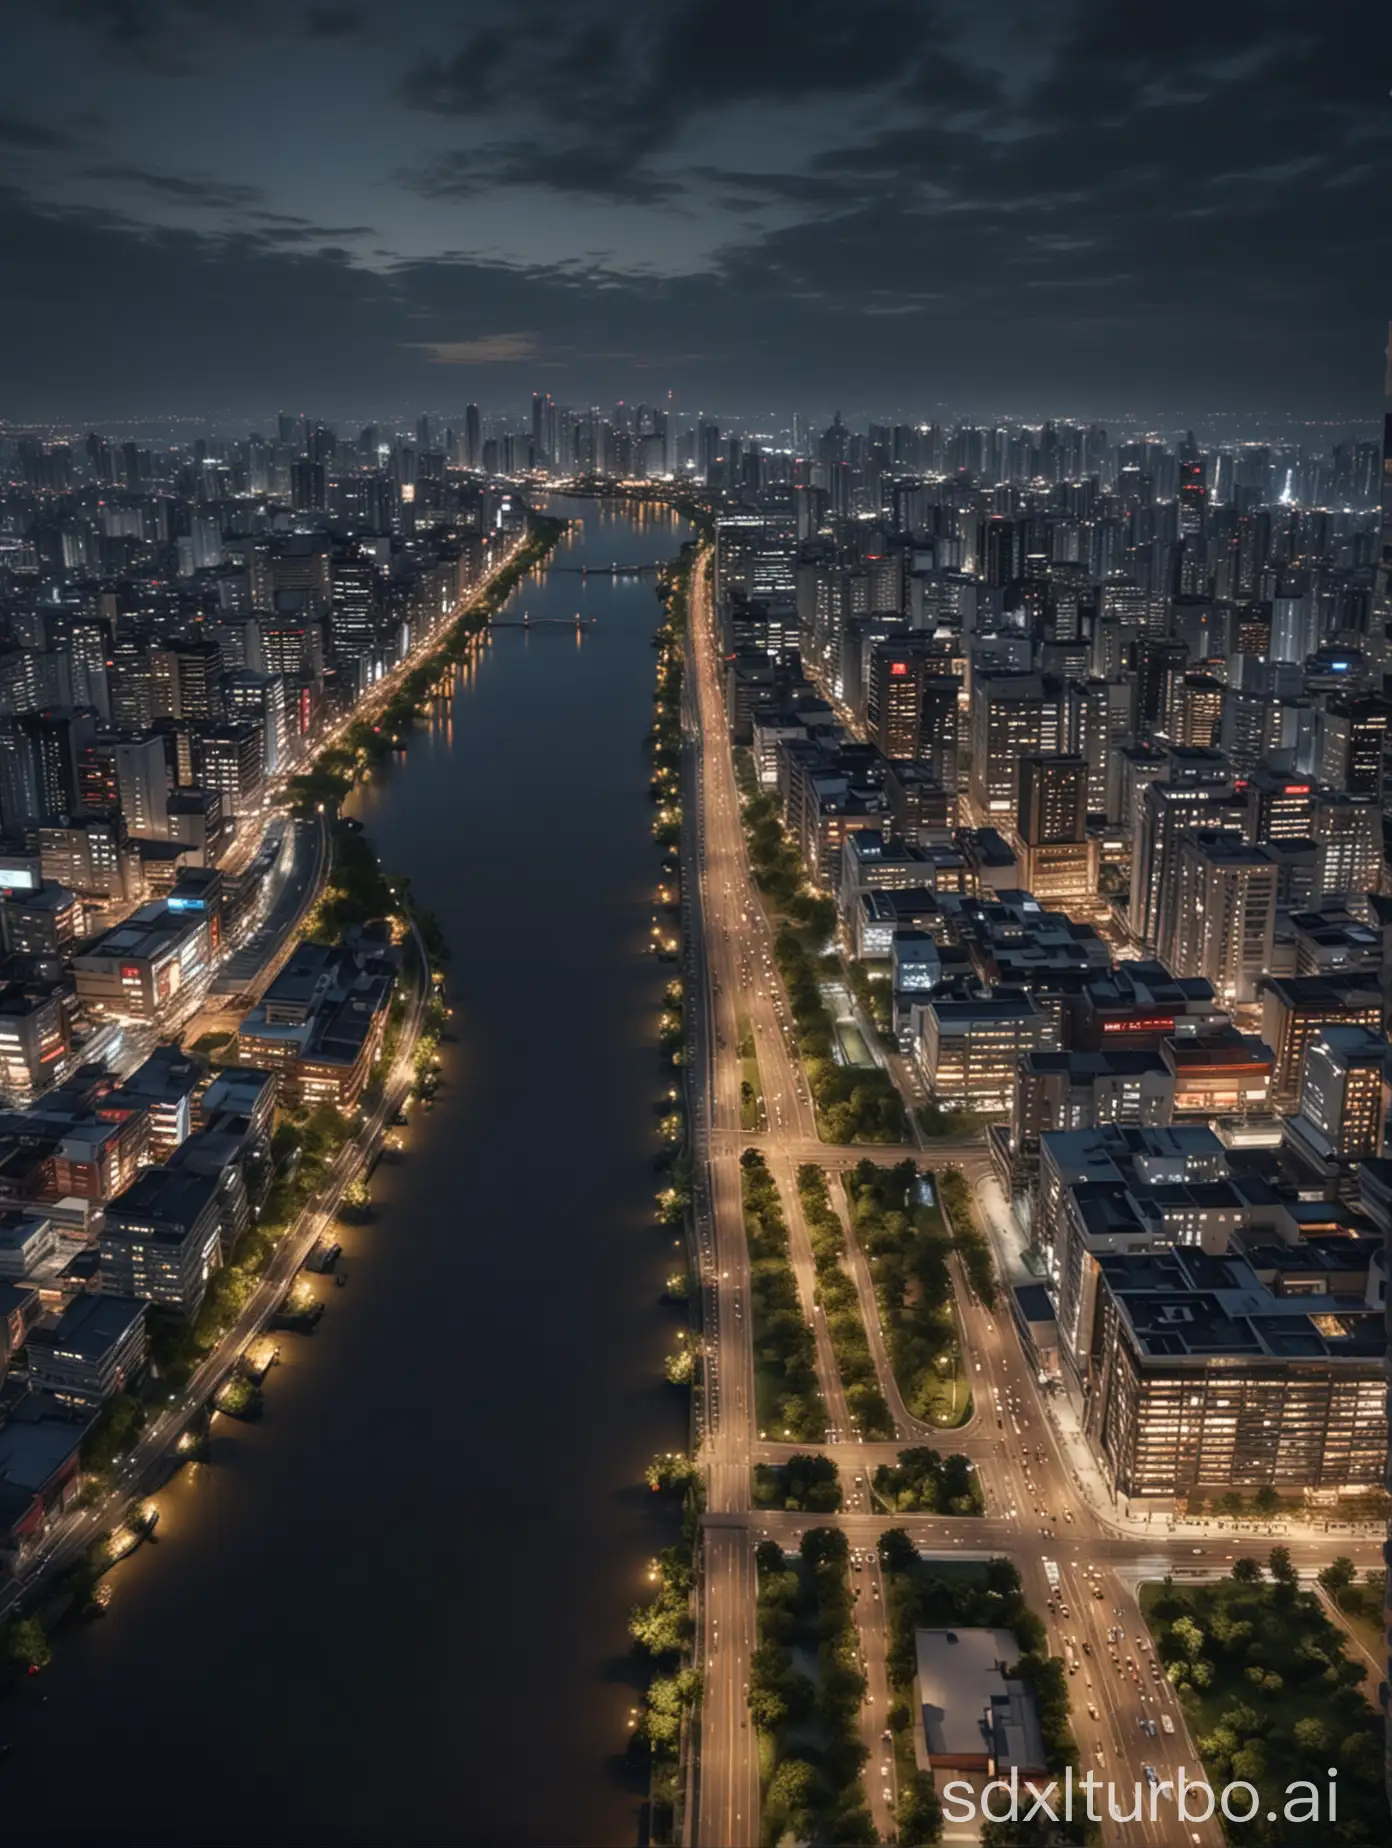 an asian style city on the river bank, along with wide 4 lane road between society and river, night view ultra realistic 8k with some 4 story commercial buildings in middle and modern housing block and parks in left and right side, wide angle drone shot left and right